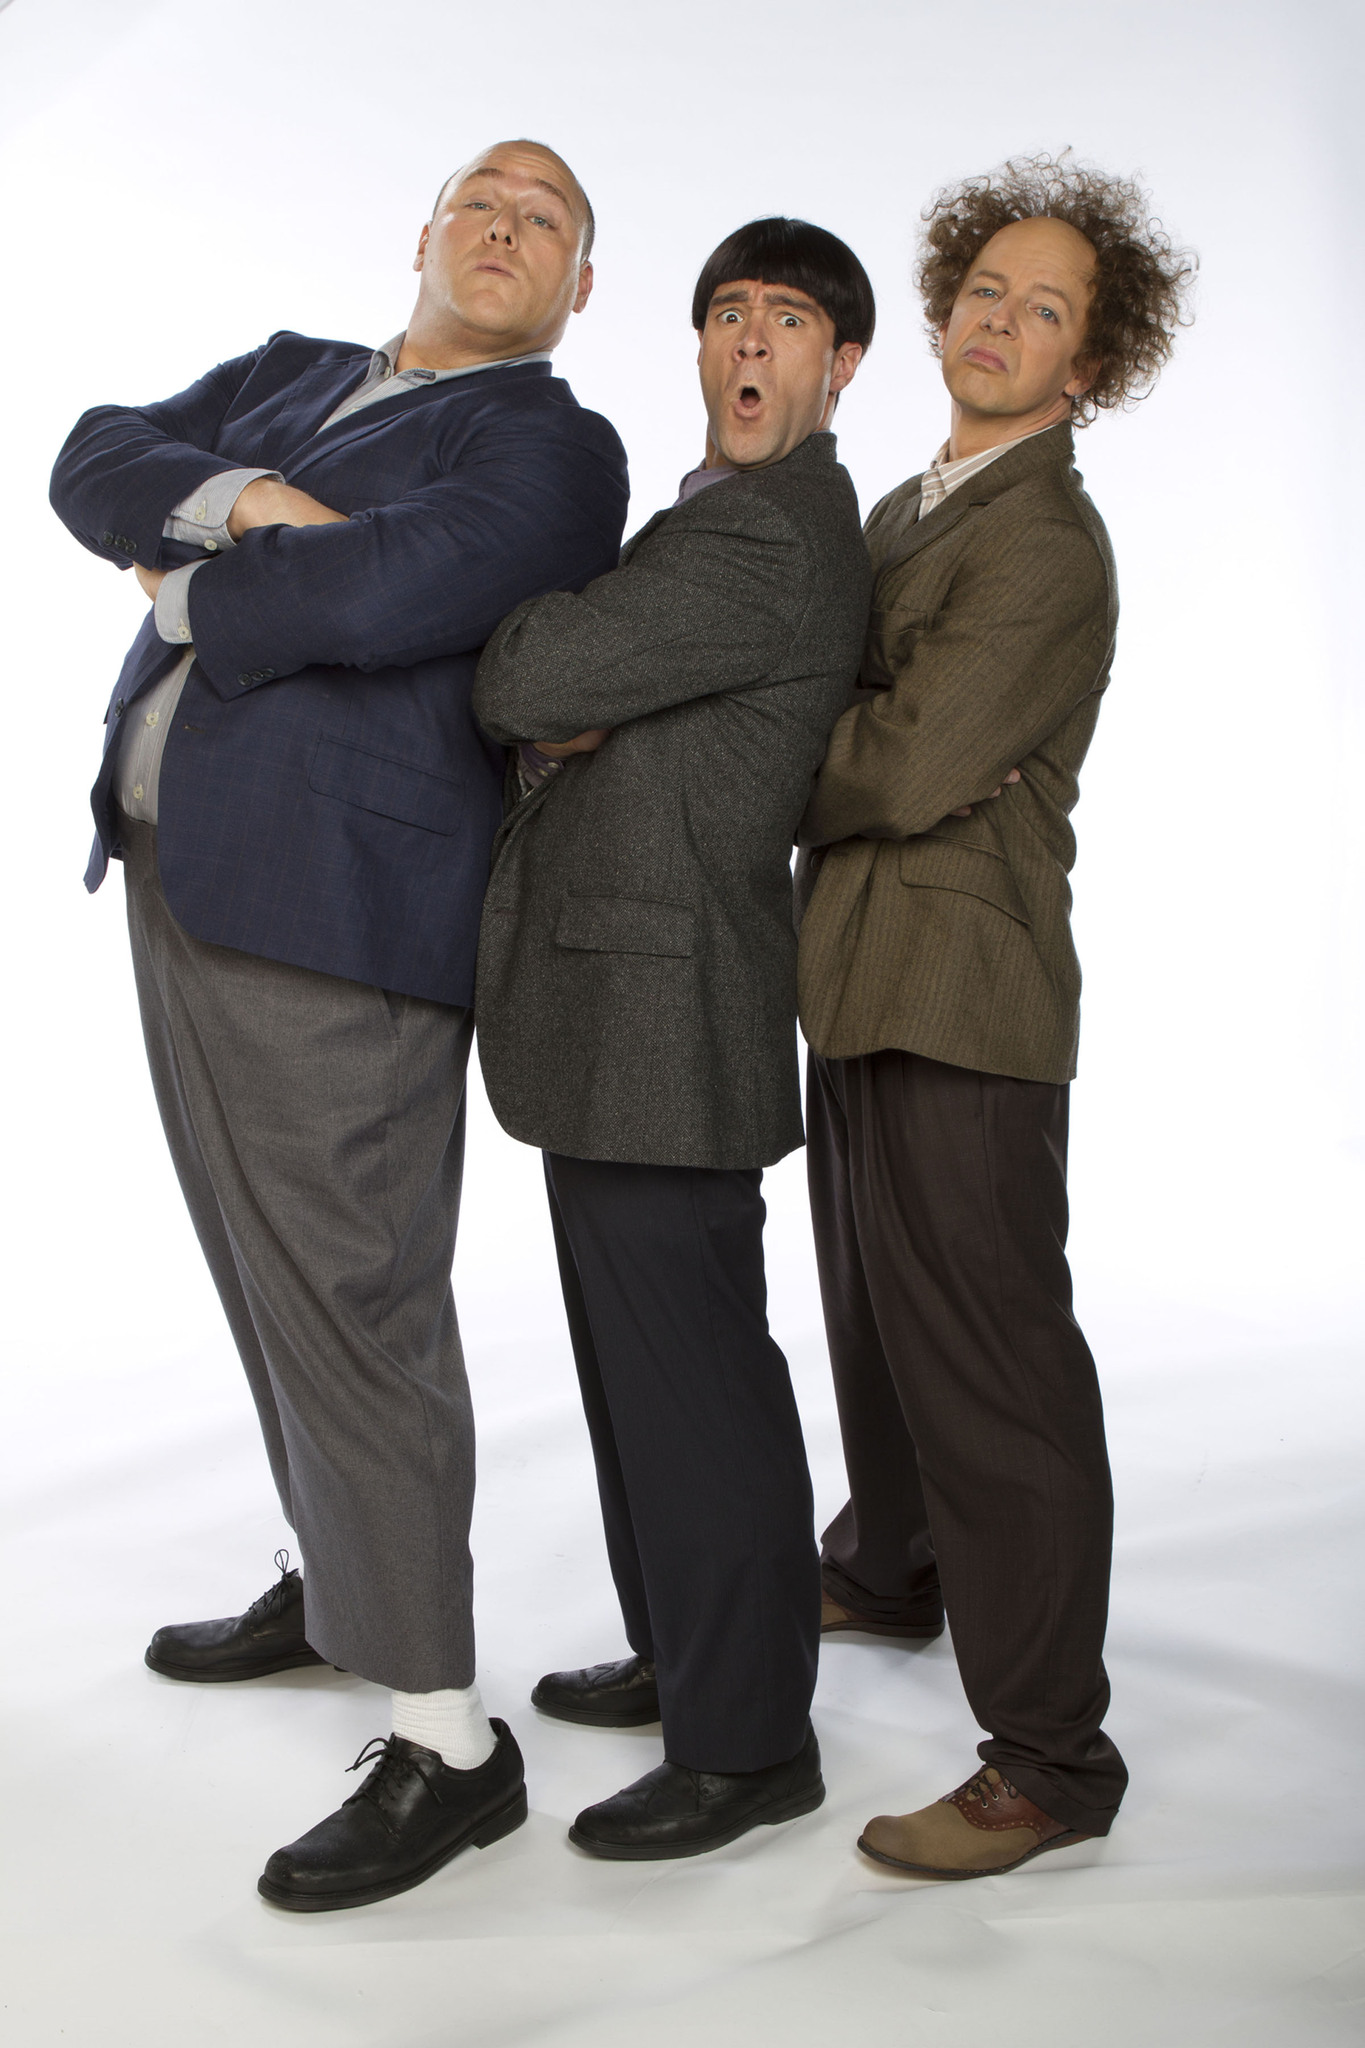 Still of Sean Hayes, Chris Diamantopoulos and Will Sasso in Trys veplos (2012)